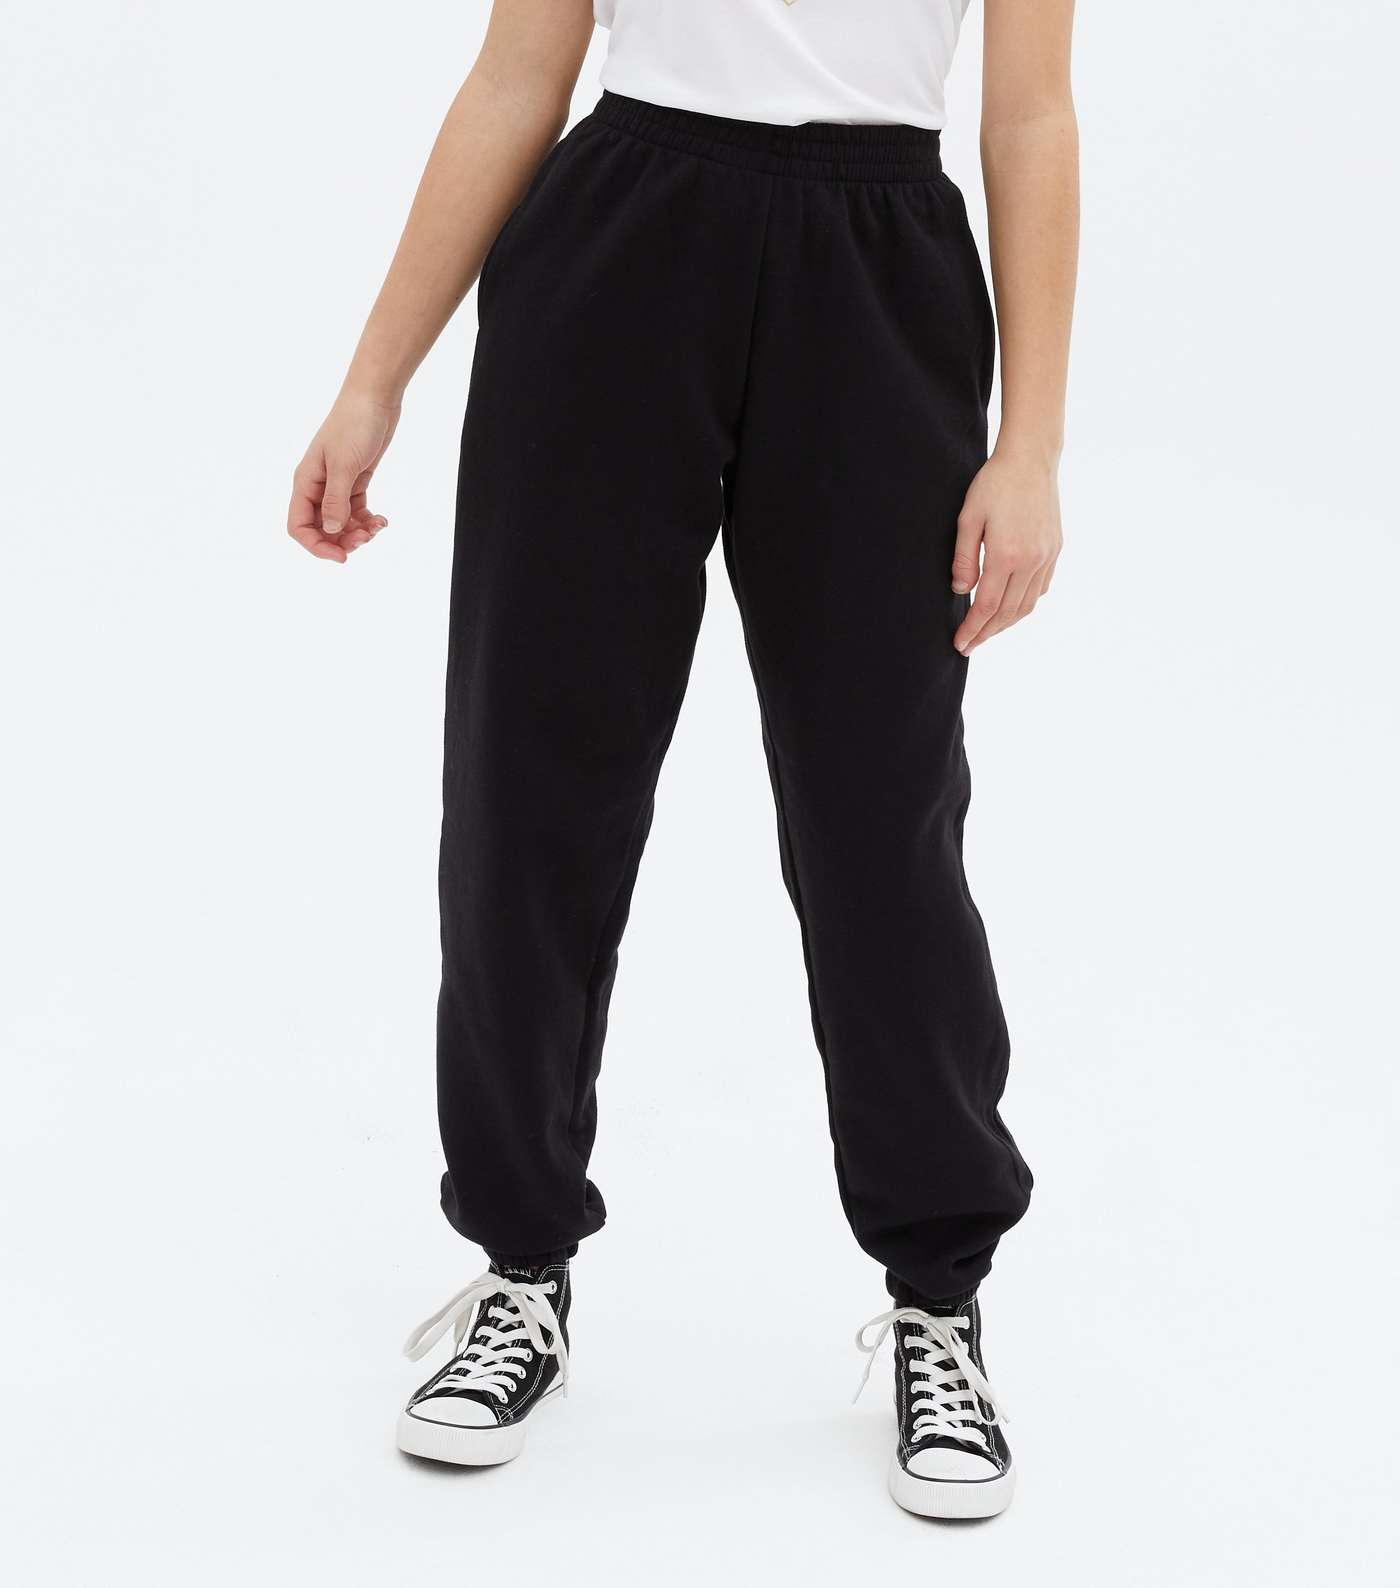 Girls 2 Pack Black and Grey Cuffed Joggers Image 2